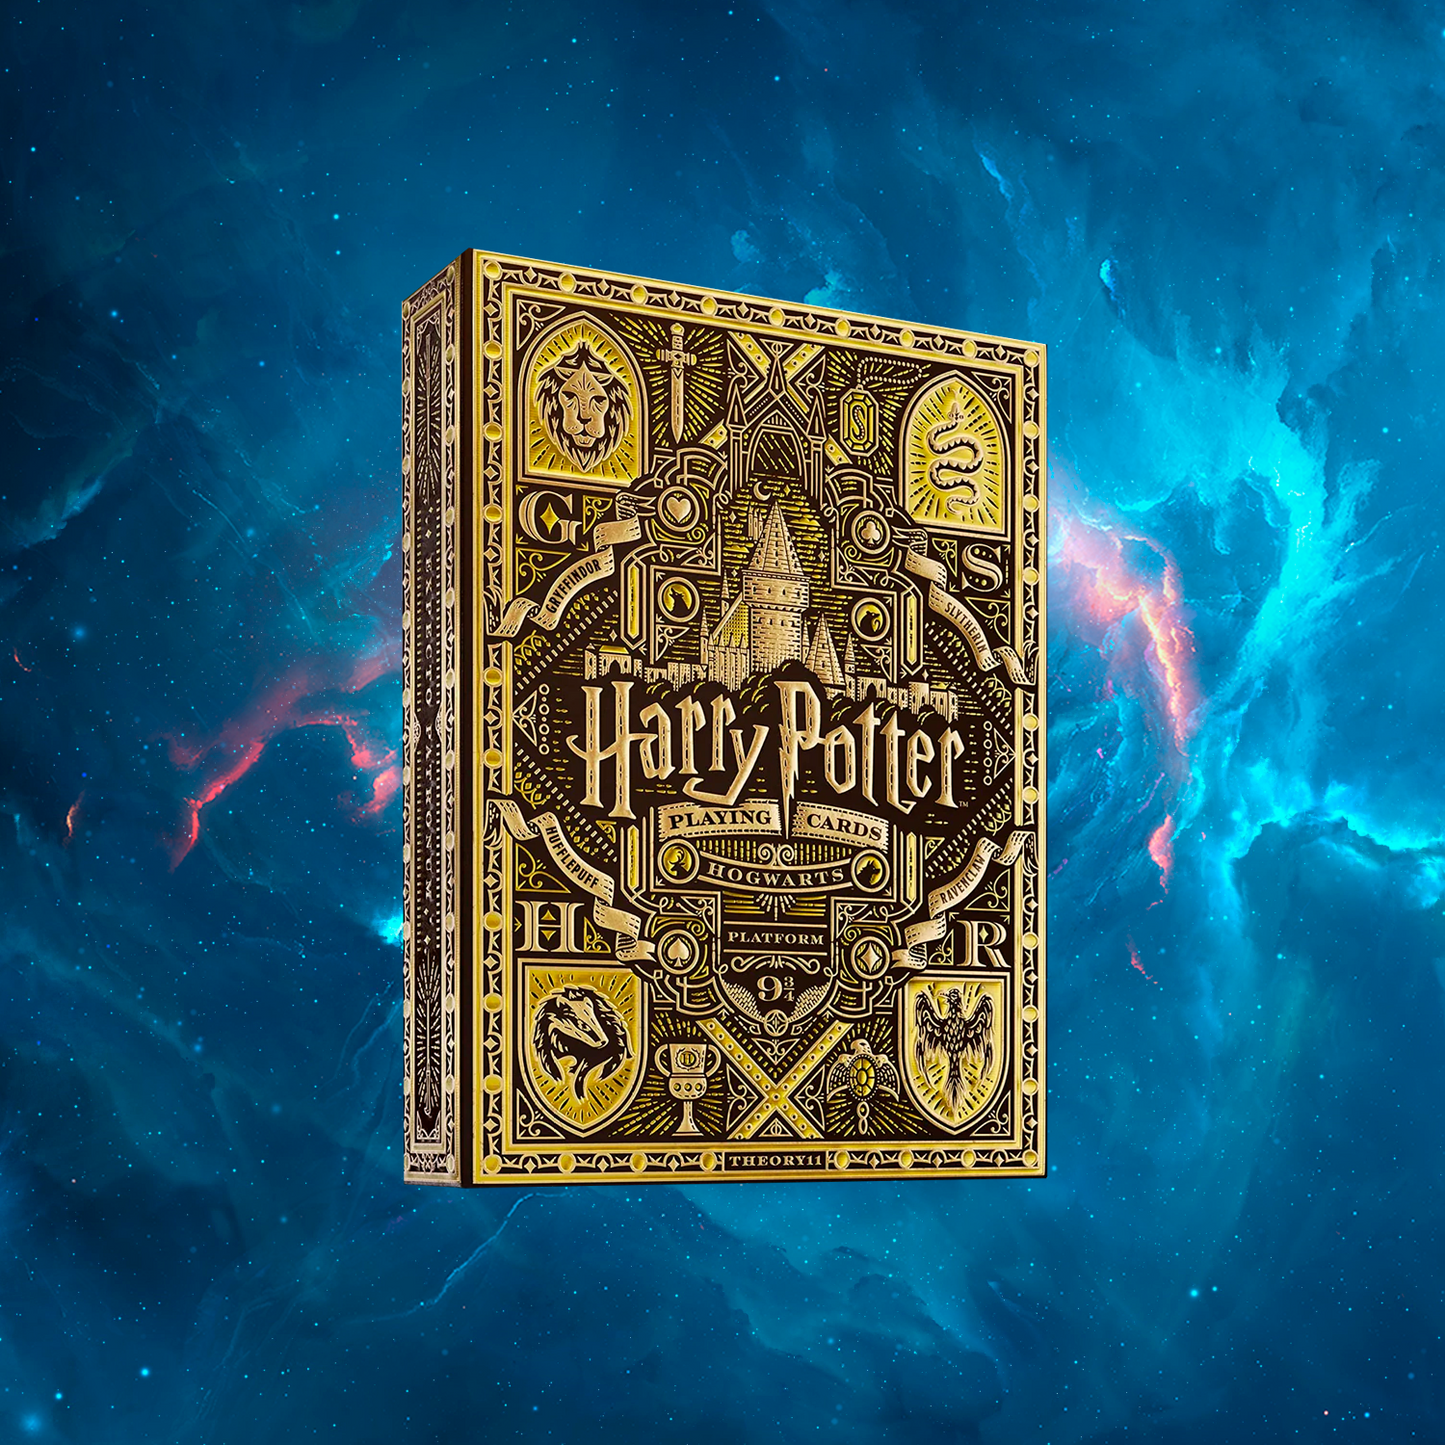 HARRY POTTER - HUFFLEPUFF PLAYING CARDS